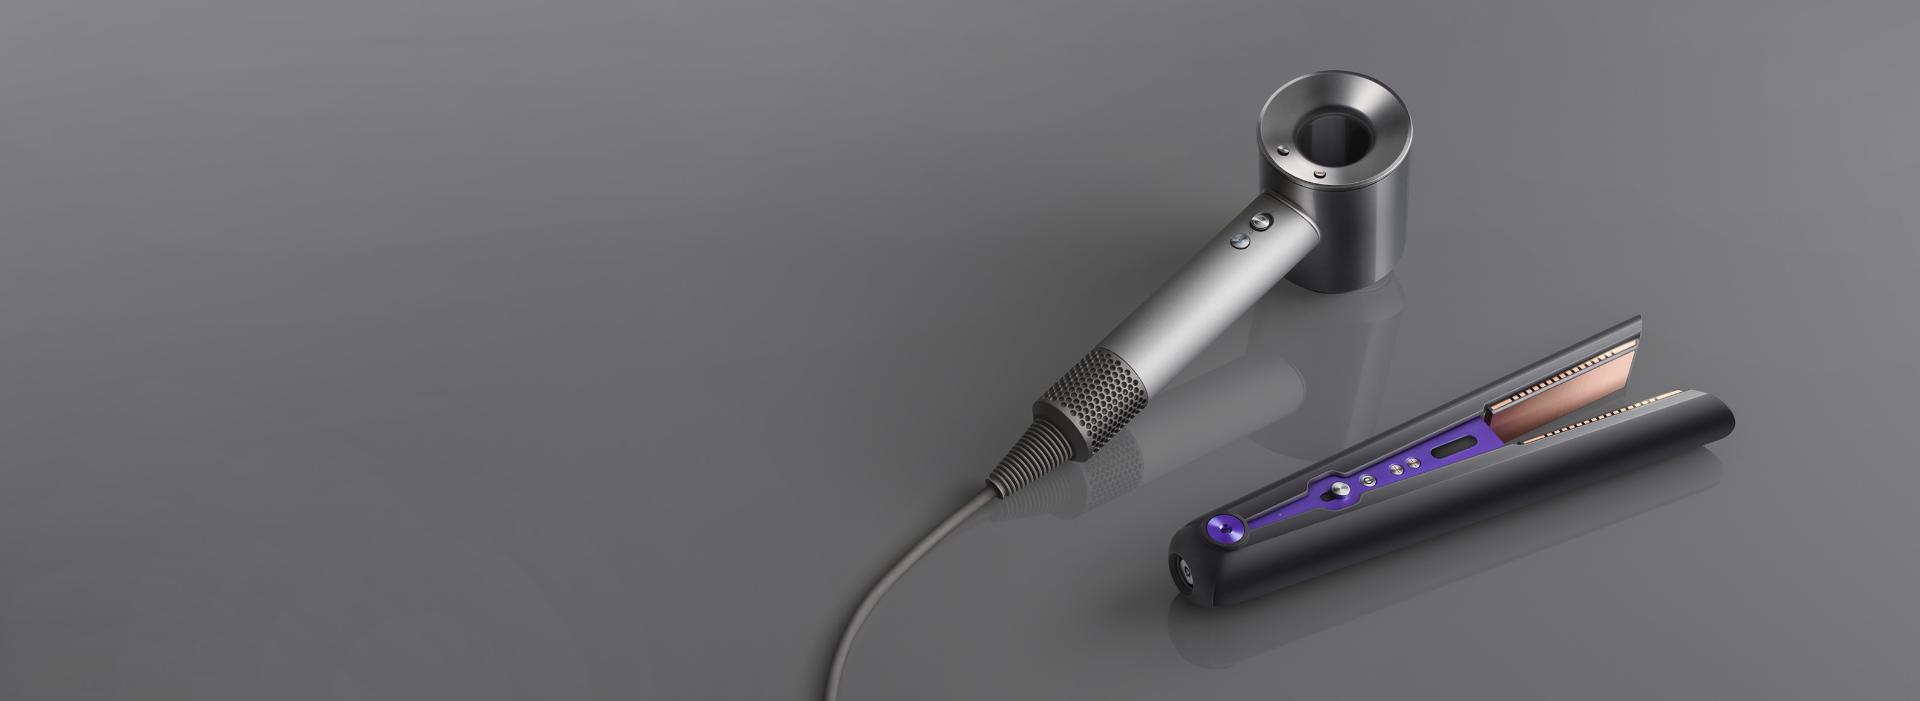 Dyson Supersonic hair dryer Pro Edition beside the Dyson Corrale straightener